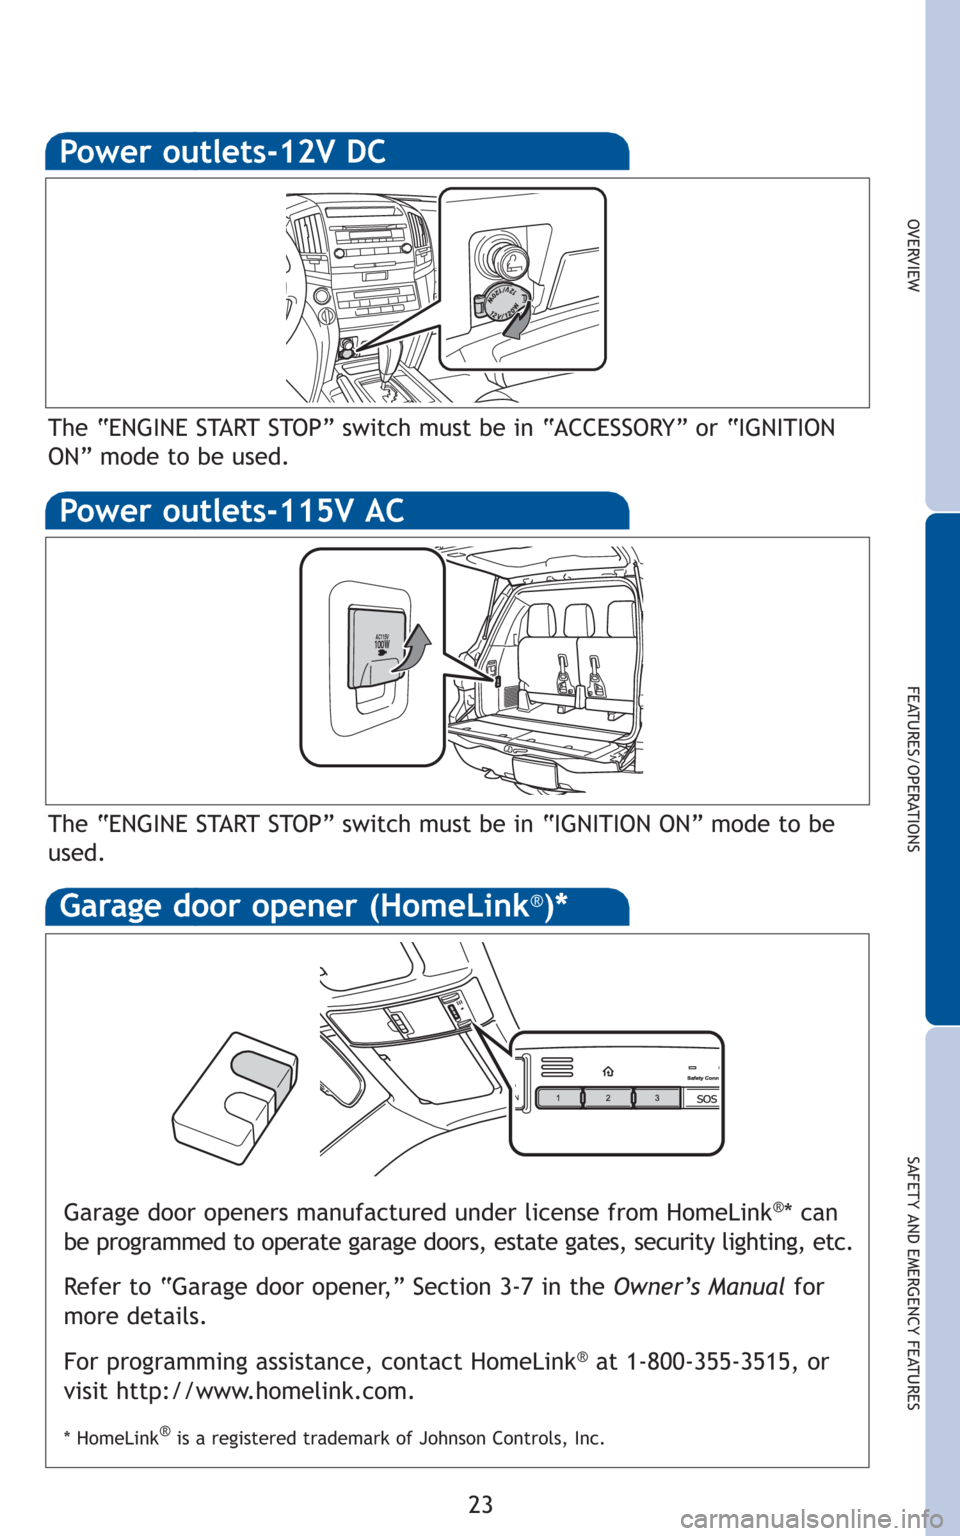 TOYOTA LAND CRUISER 2011 J200 Quick Reference Guide 23
OVERVIEW
FEATURES/OPERATIONS
SAFETY AND EMERGENCY FEATURES
Power outlets-12V DC
The “ENGINE START STOP” switch must be in “ACCESSORY” or “IGNITION
ON” mode to be used.
Power outlets-115